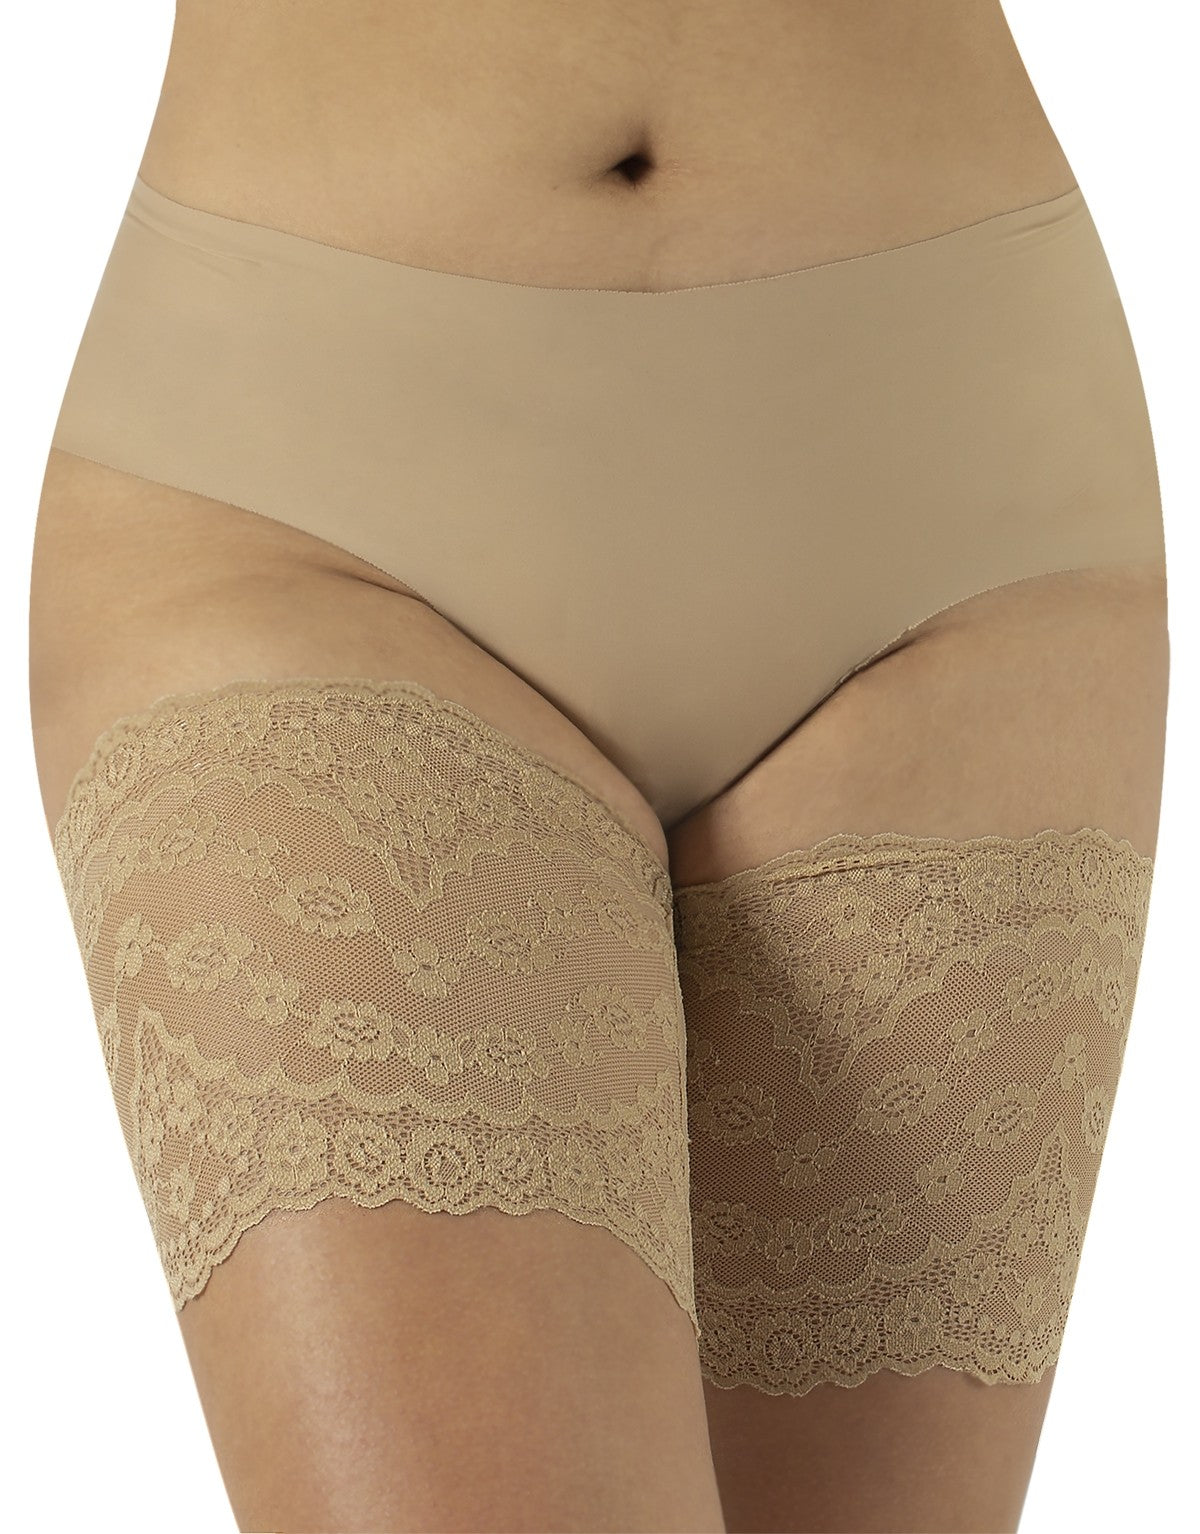 Calzitaly INT0017 Anti-Chafing Bands - nude floral lace thigh bands to help prevent chub rub